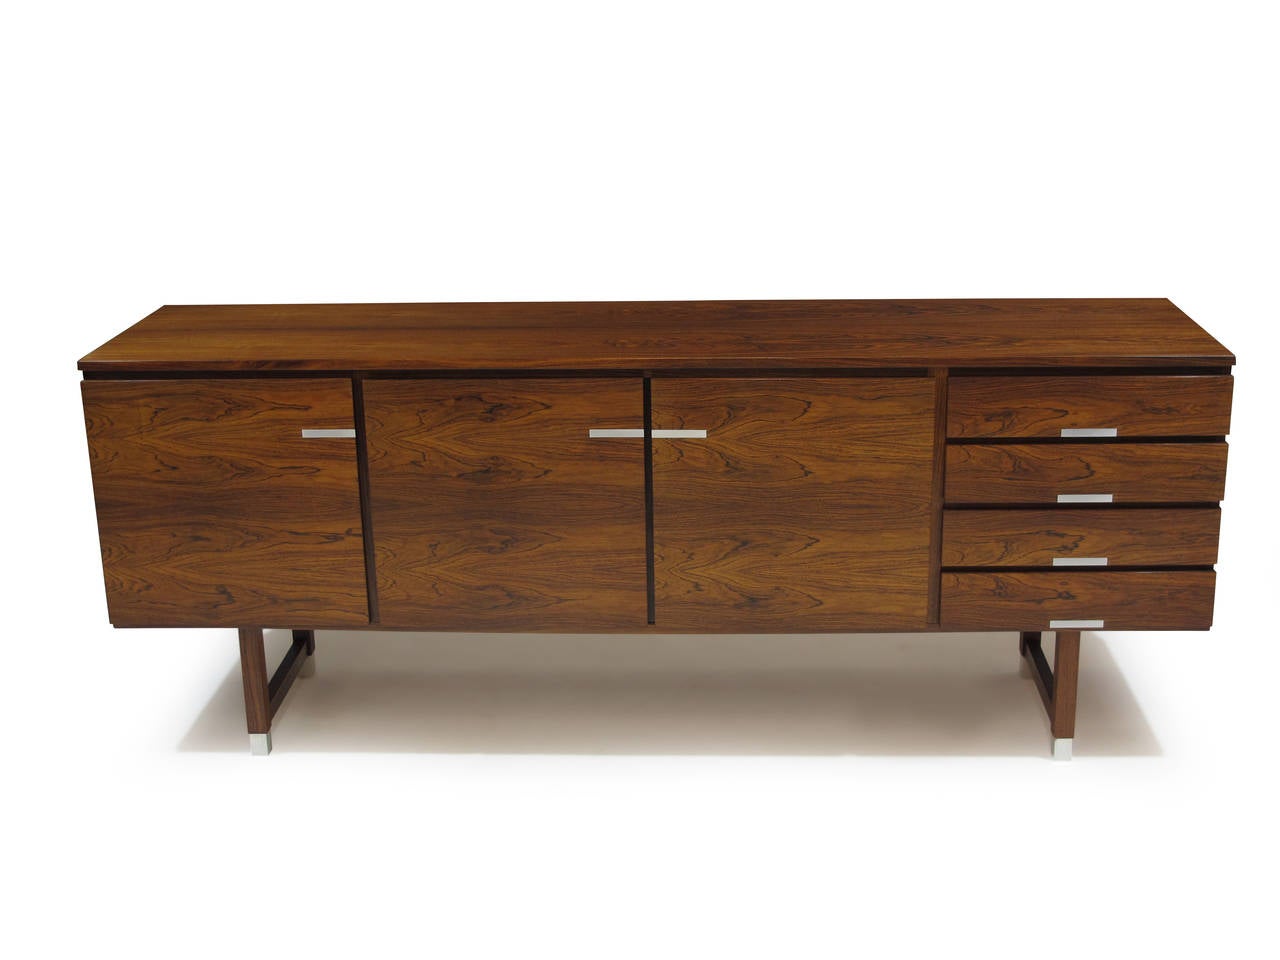 Rosewood credenza designed by Kai Kristiansen. Features a horizontal book match grain on doors with contrasting aluminum inlay; white oak interior with adjustable shelves. Raised on square legs with capped feet of aluminum.